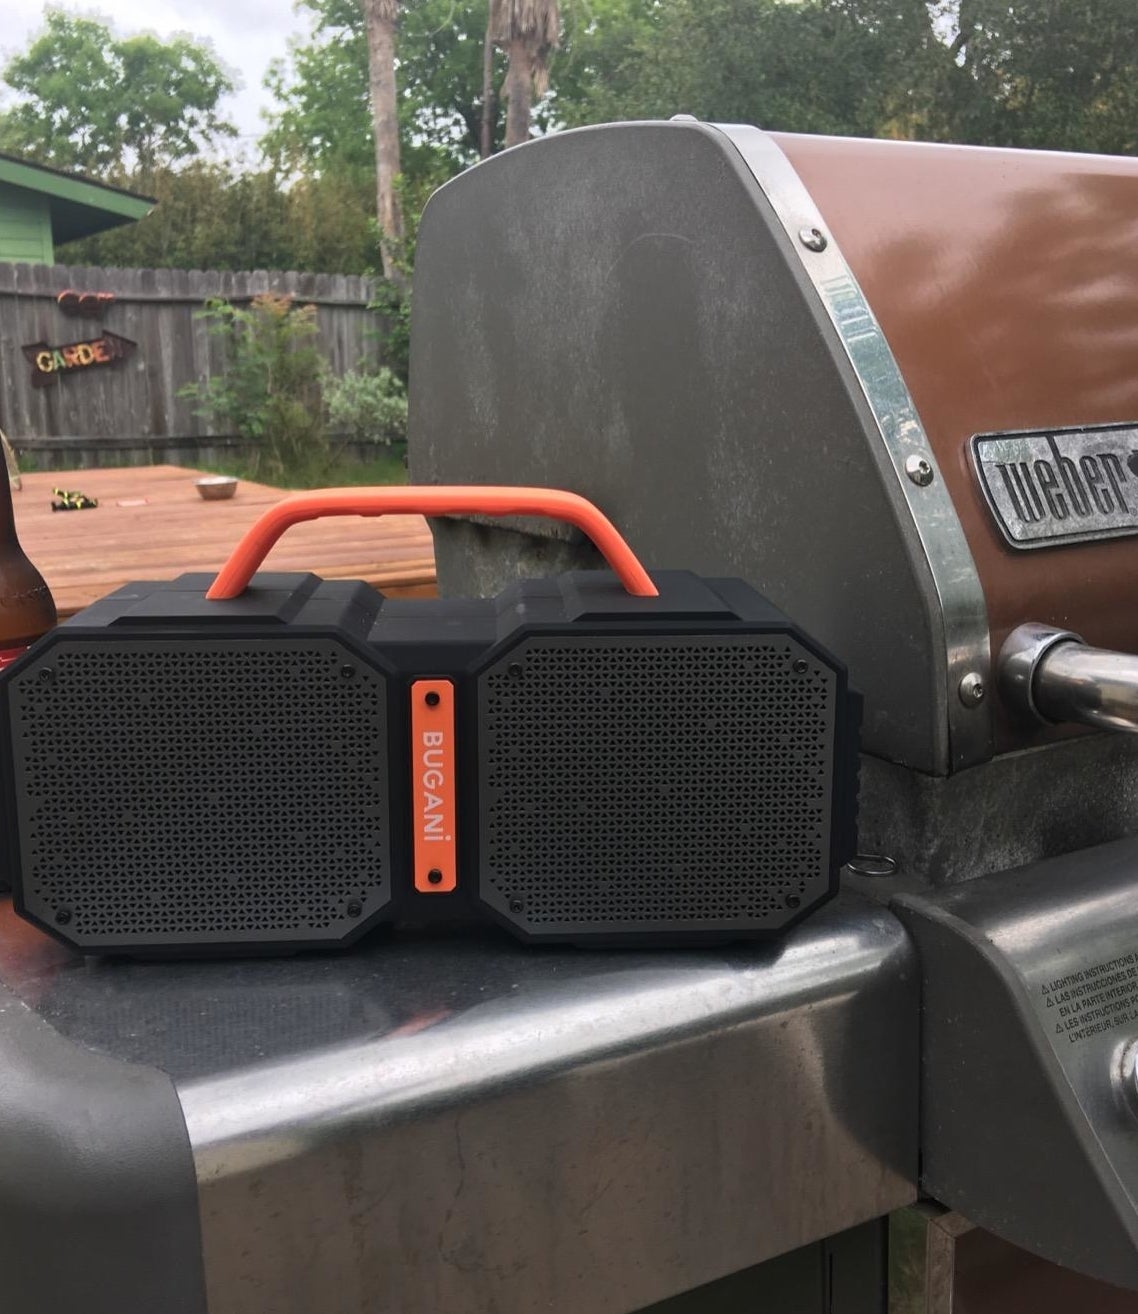 black and orange boombox-shaped speaker sitting on grill side table